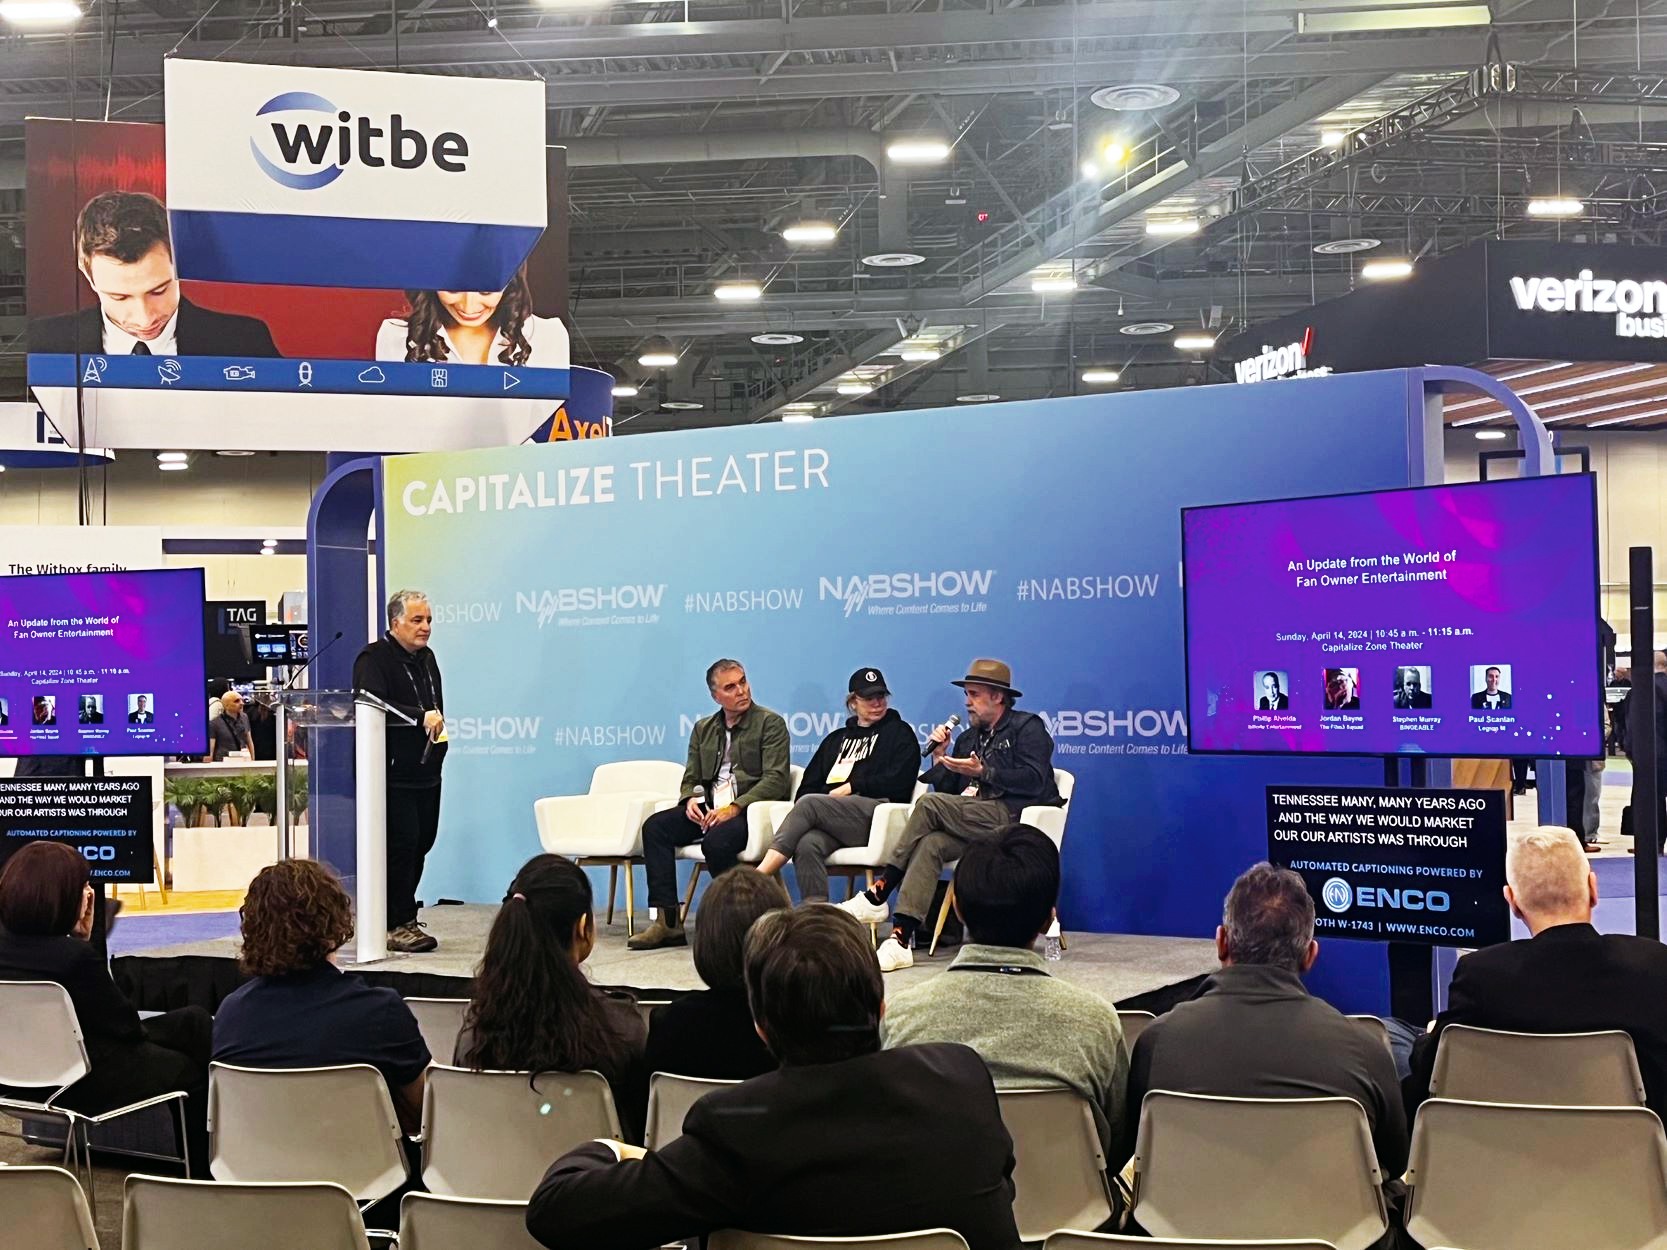 One of NAB Show’s discussion panels